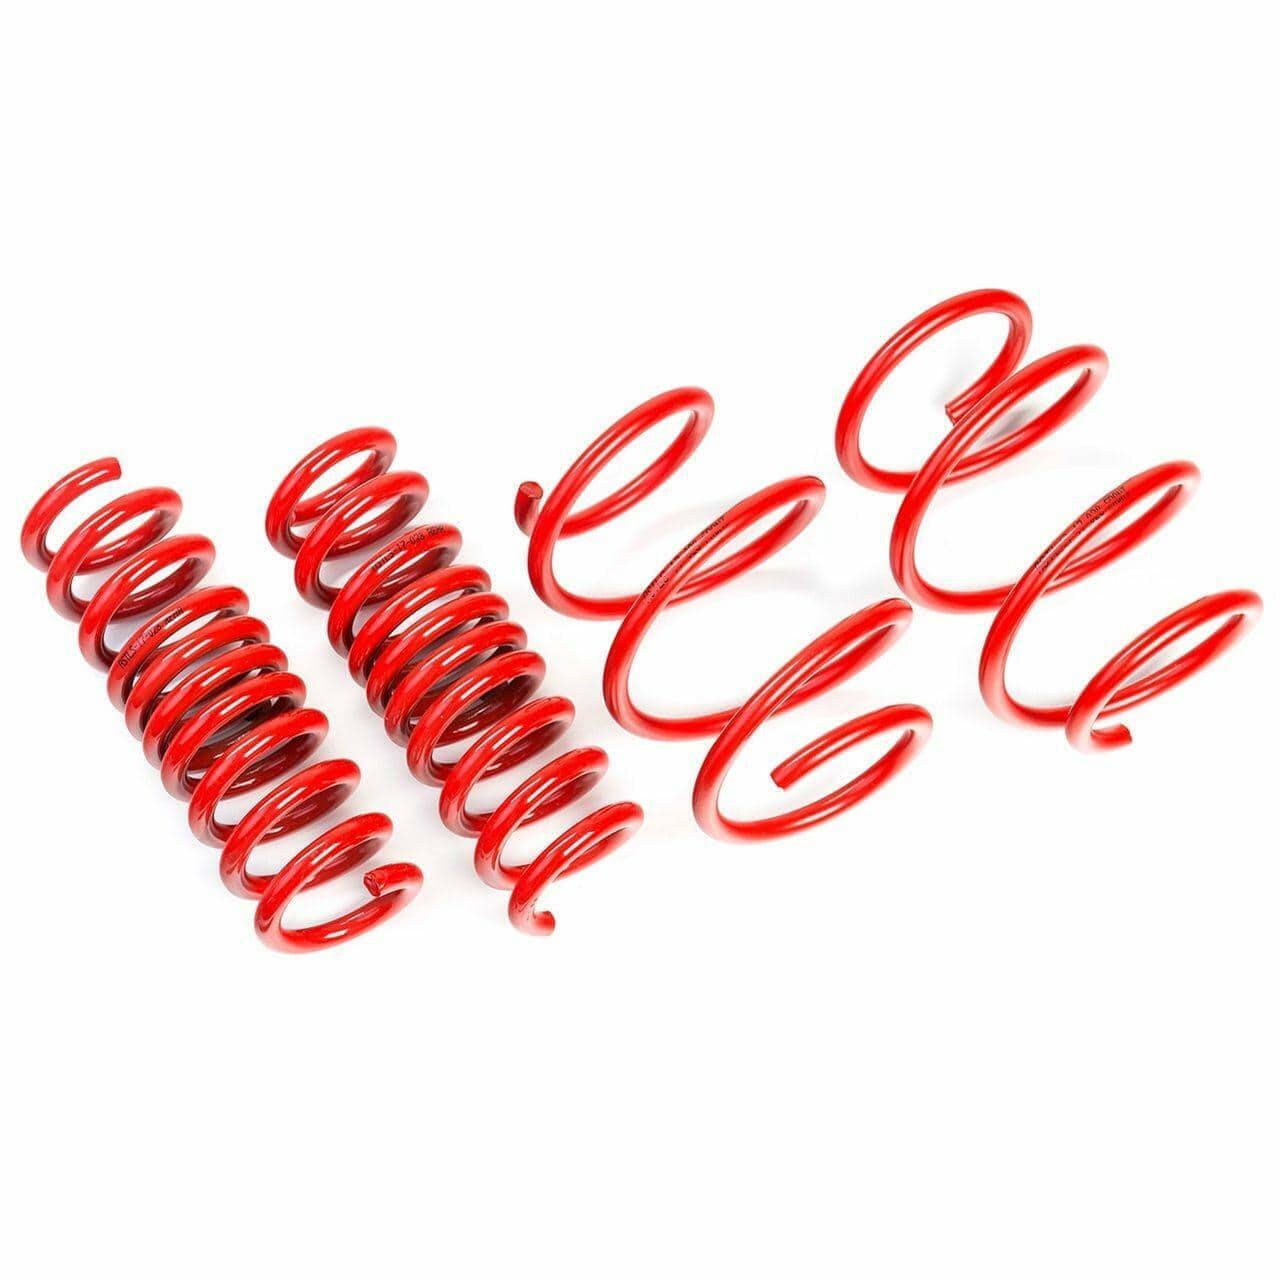 AST Suspension Lowering Springs (35MM/30MM) - 2014+ Ford Mustang Fastback/Convertible 2.3/3.7 V6 ASTLS-17-044